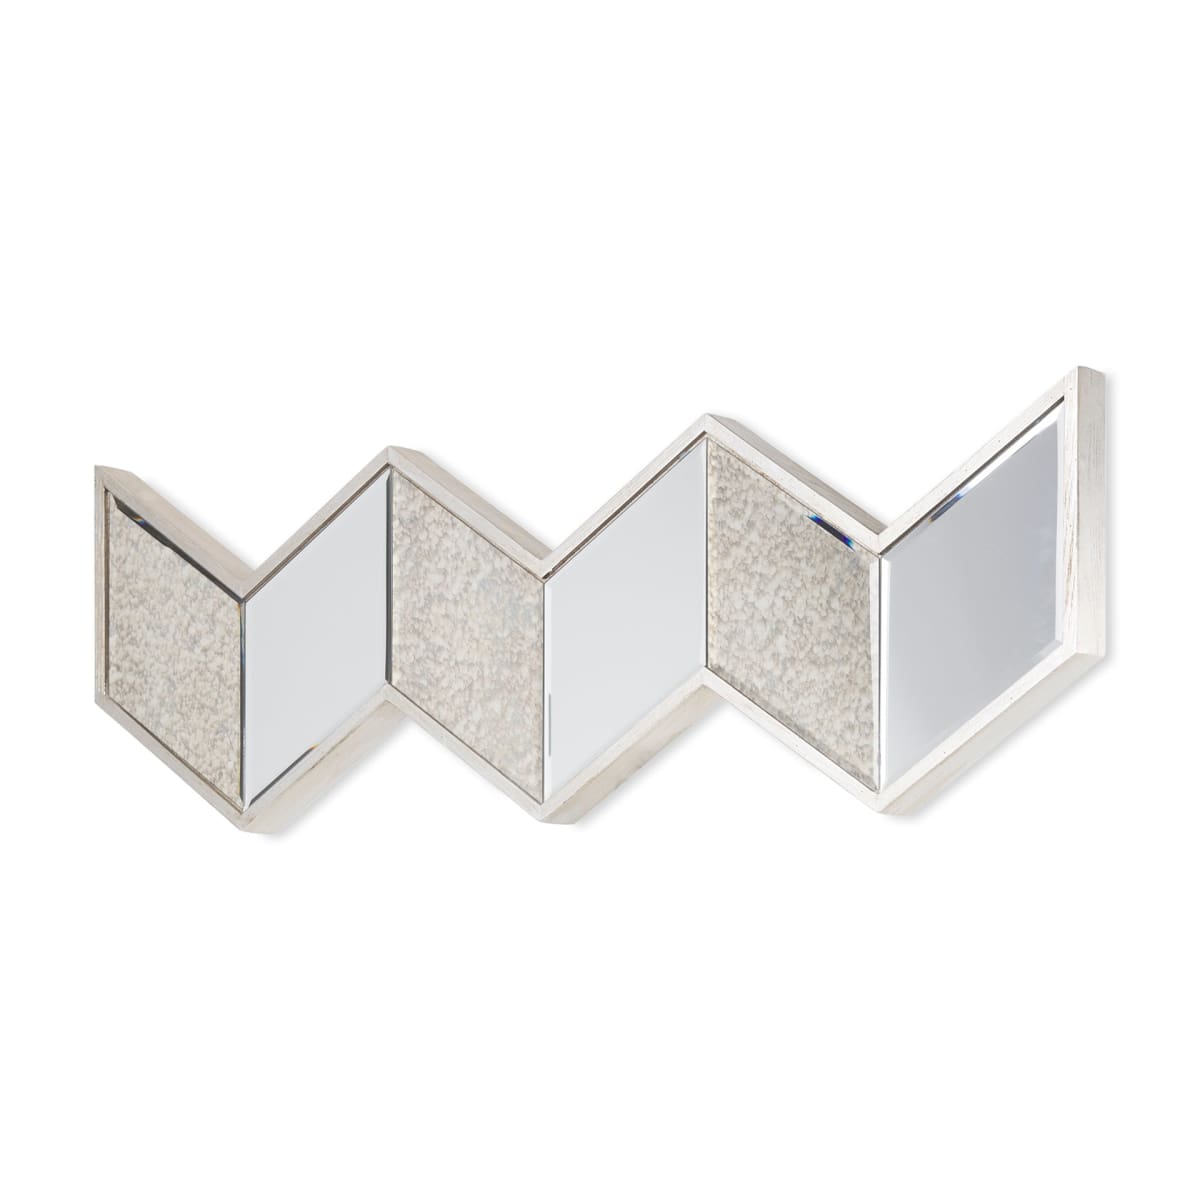 Cheveronna Wall Mirror Silver Wood | 36x12 - wall-mirrors-grouped